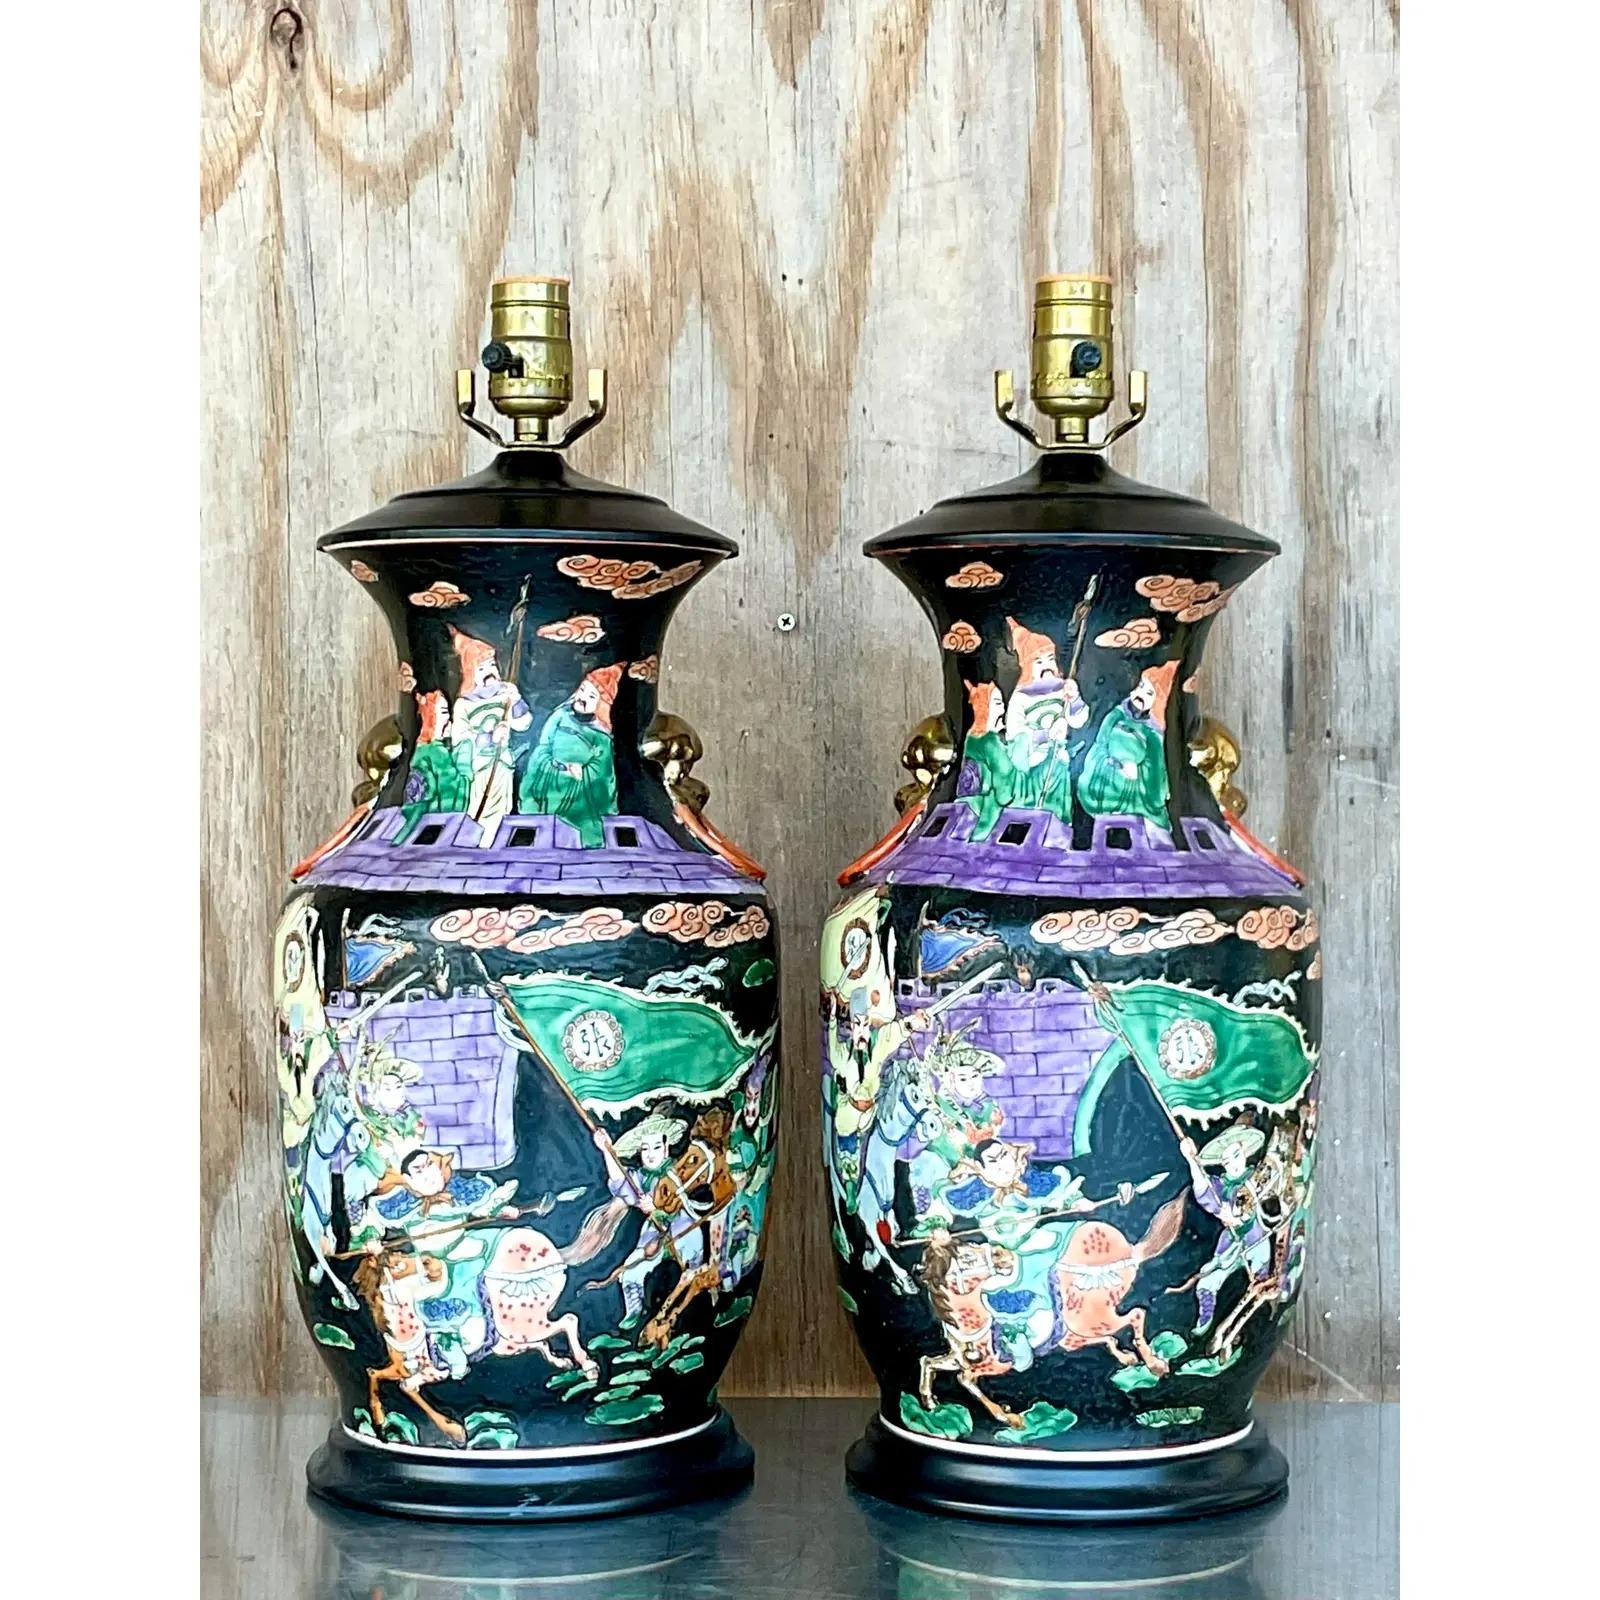 Stunning pair of vintage Asian ceramic lamps. Beautiful jewel tone composition in classic Chinoiserie scenes. Acquired from a Palm Beach estate.